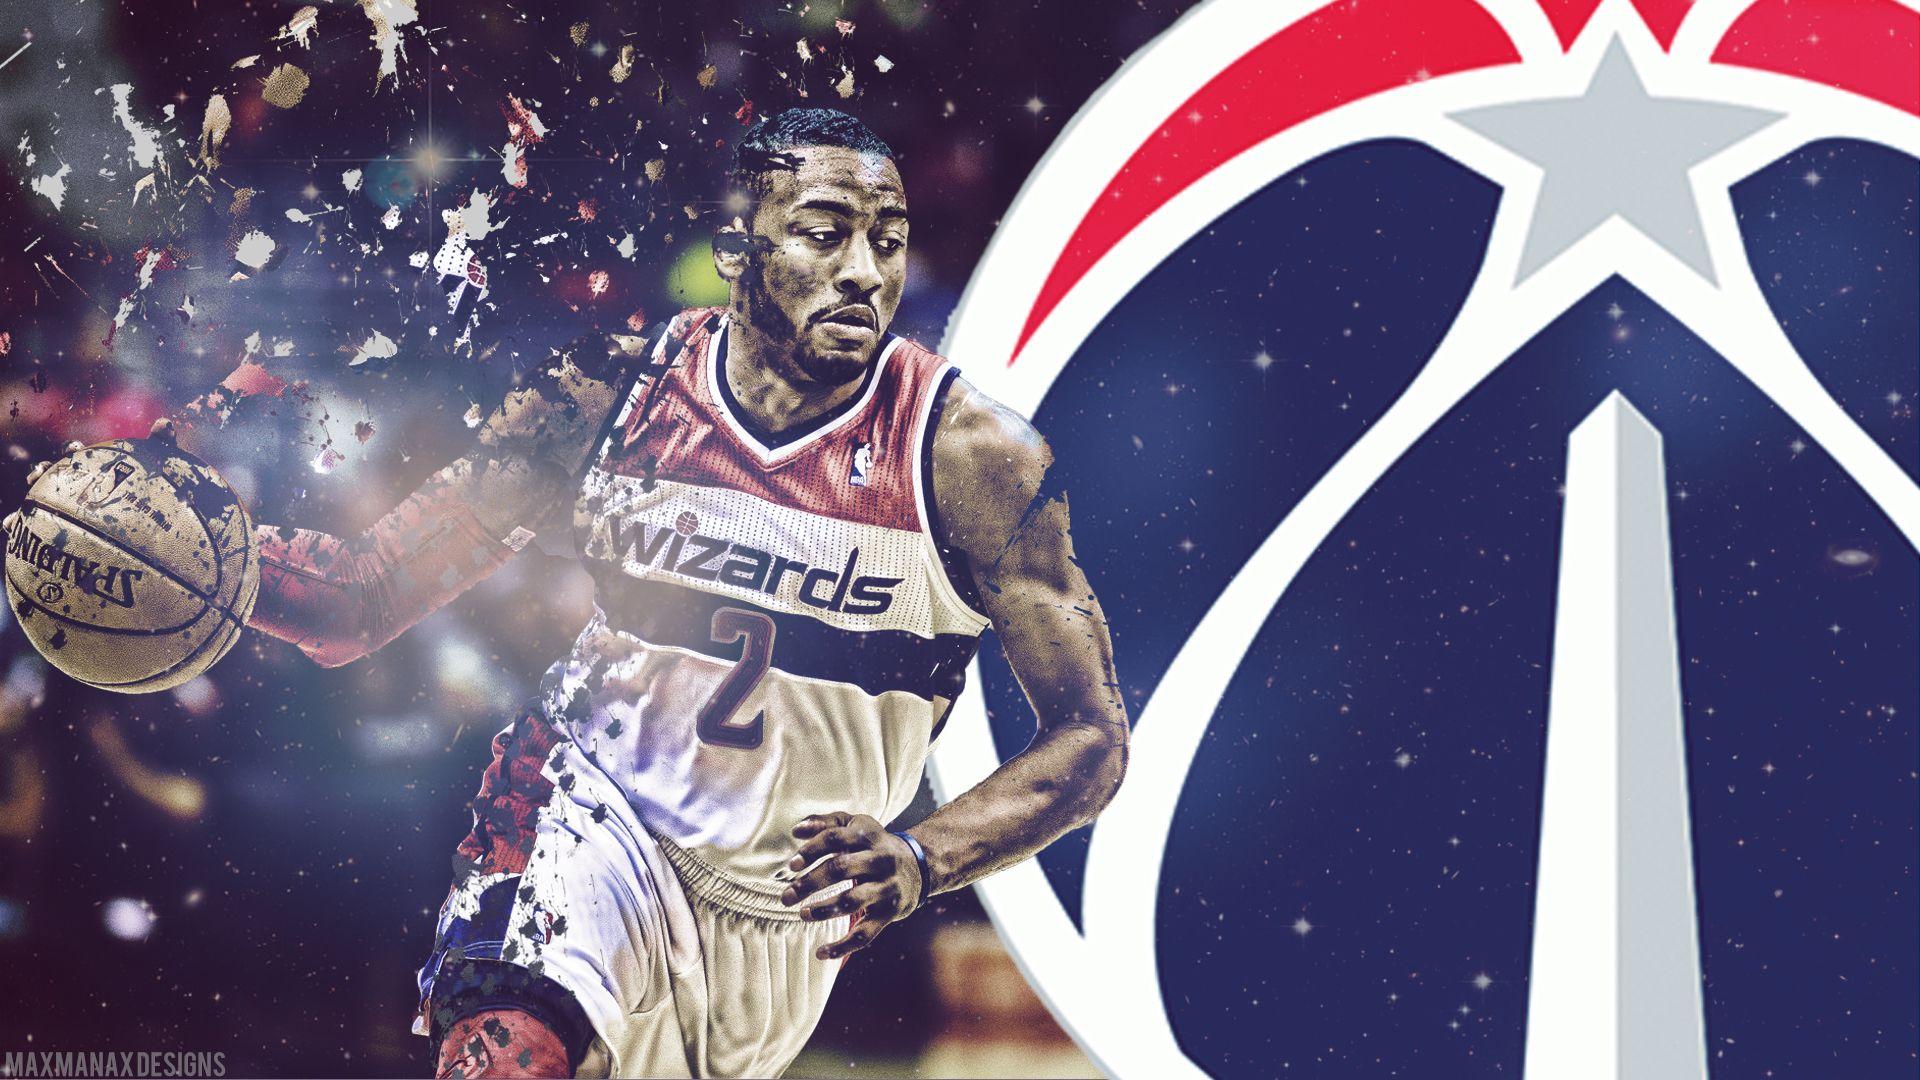 John Wall Wallpaper High Resolution and Quality Download